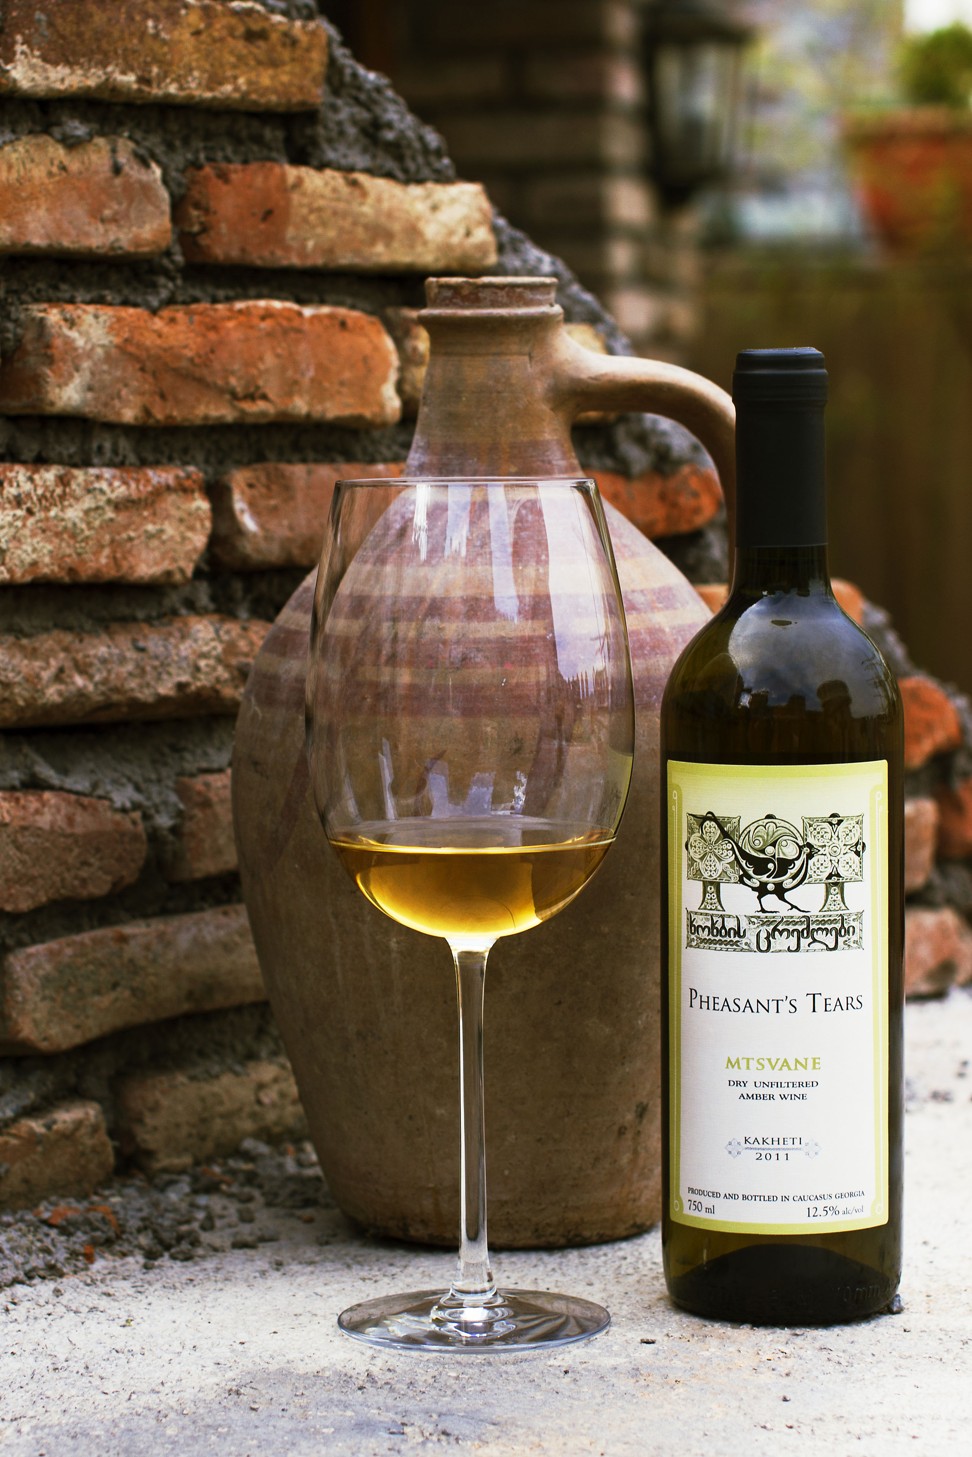 All Pheasant’s Tears vintages are organic, unfiltered and 100-per-cent natural.